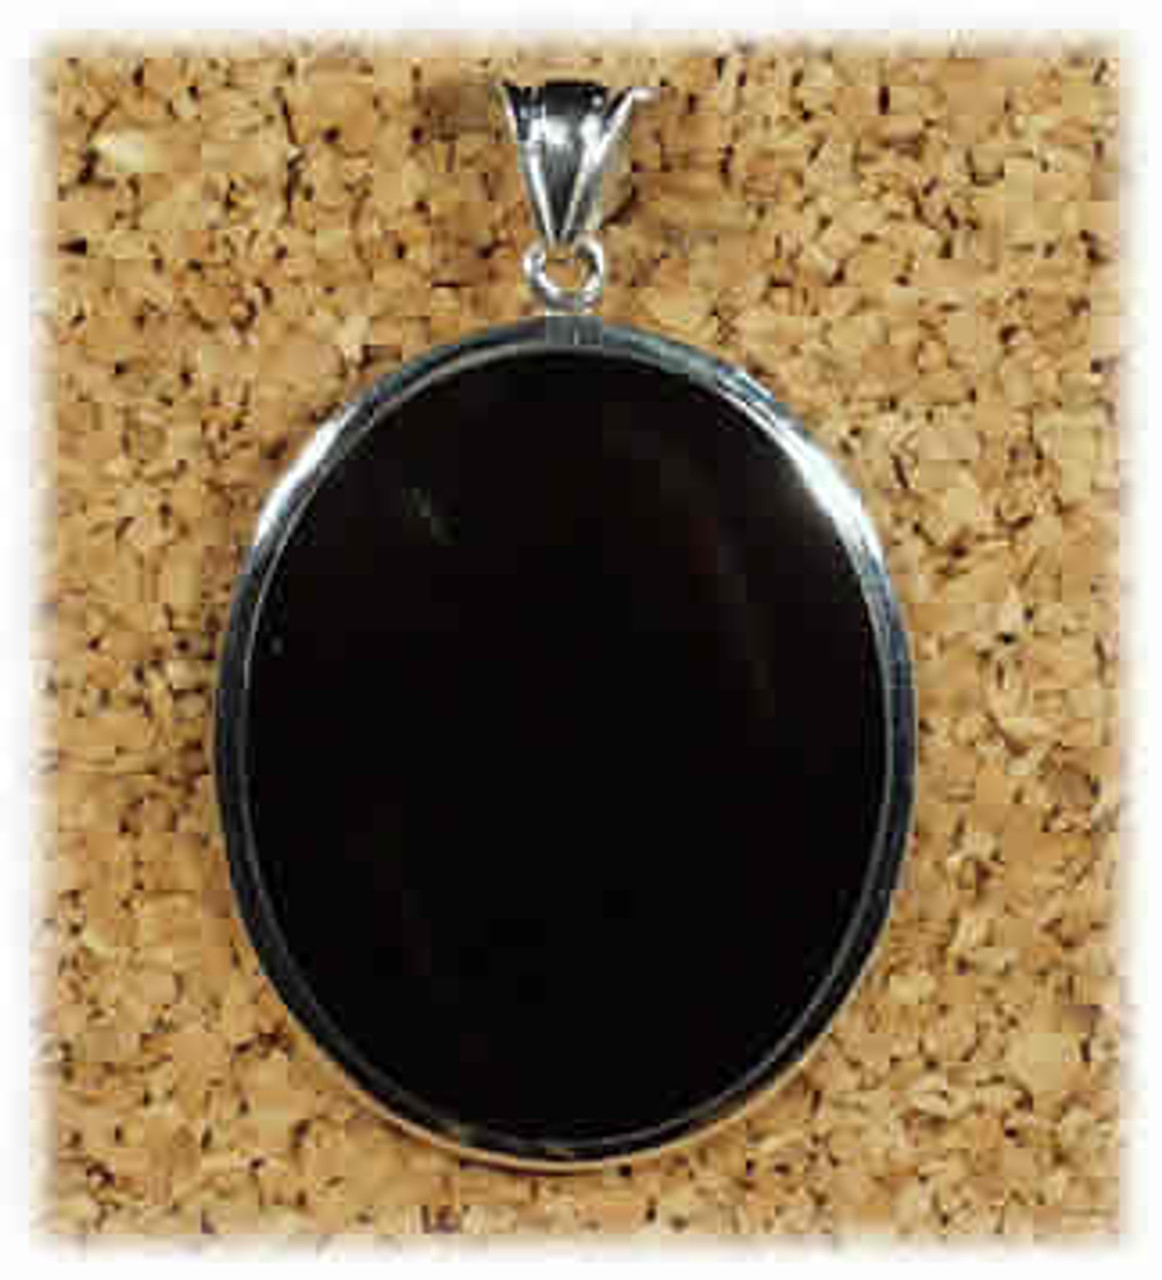 304BO: Black Onyx Large Oval Pendant Mounted in Sterling Sliver, Engravable Area, 1-5/16 inch x 1-5/8 inch.